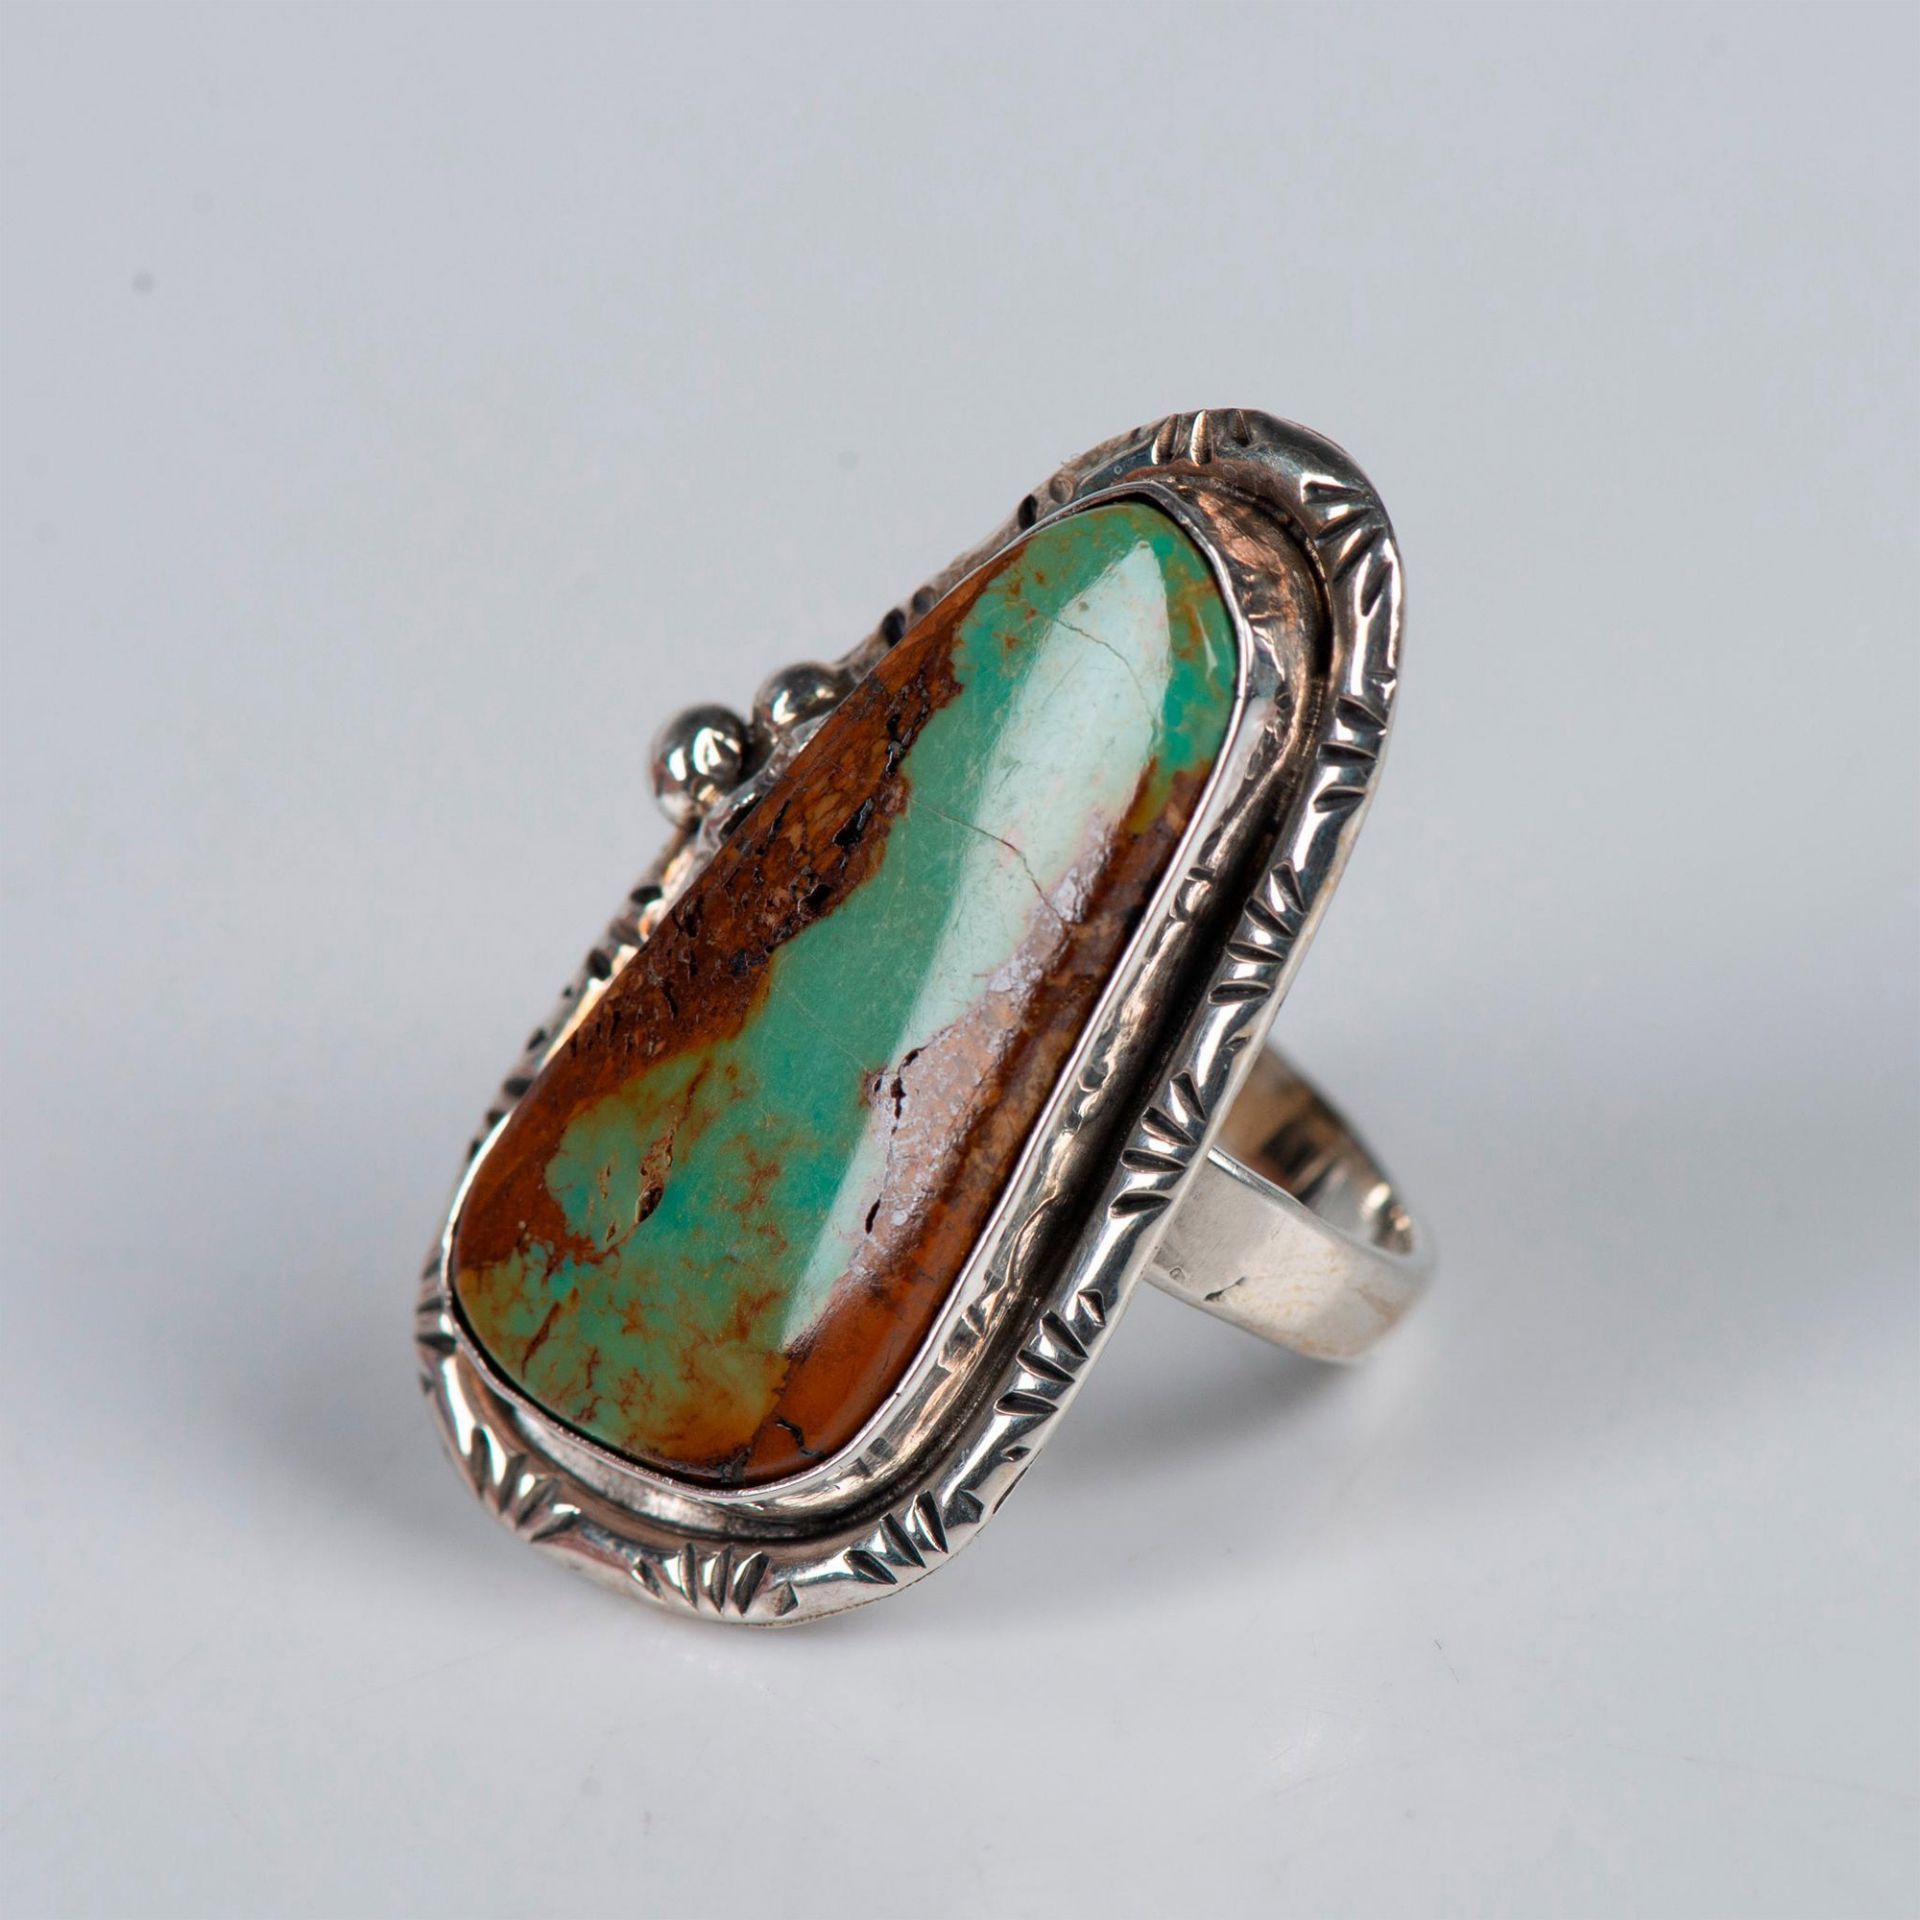 2pc Navajo Sterling Silver and Turquoise Necklace & Ring - Image 5 of 7